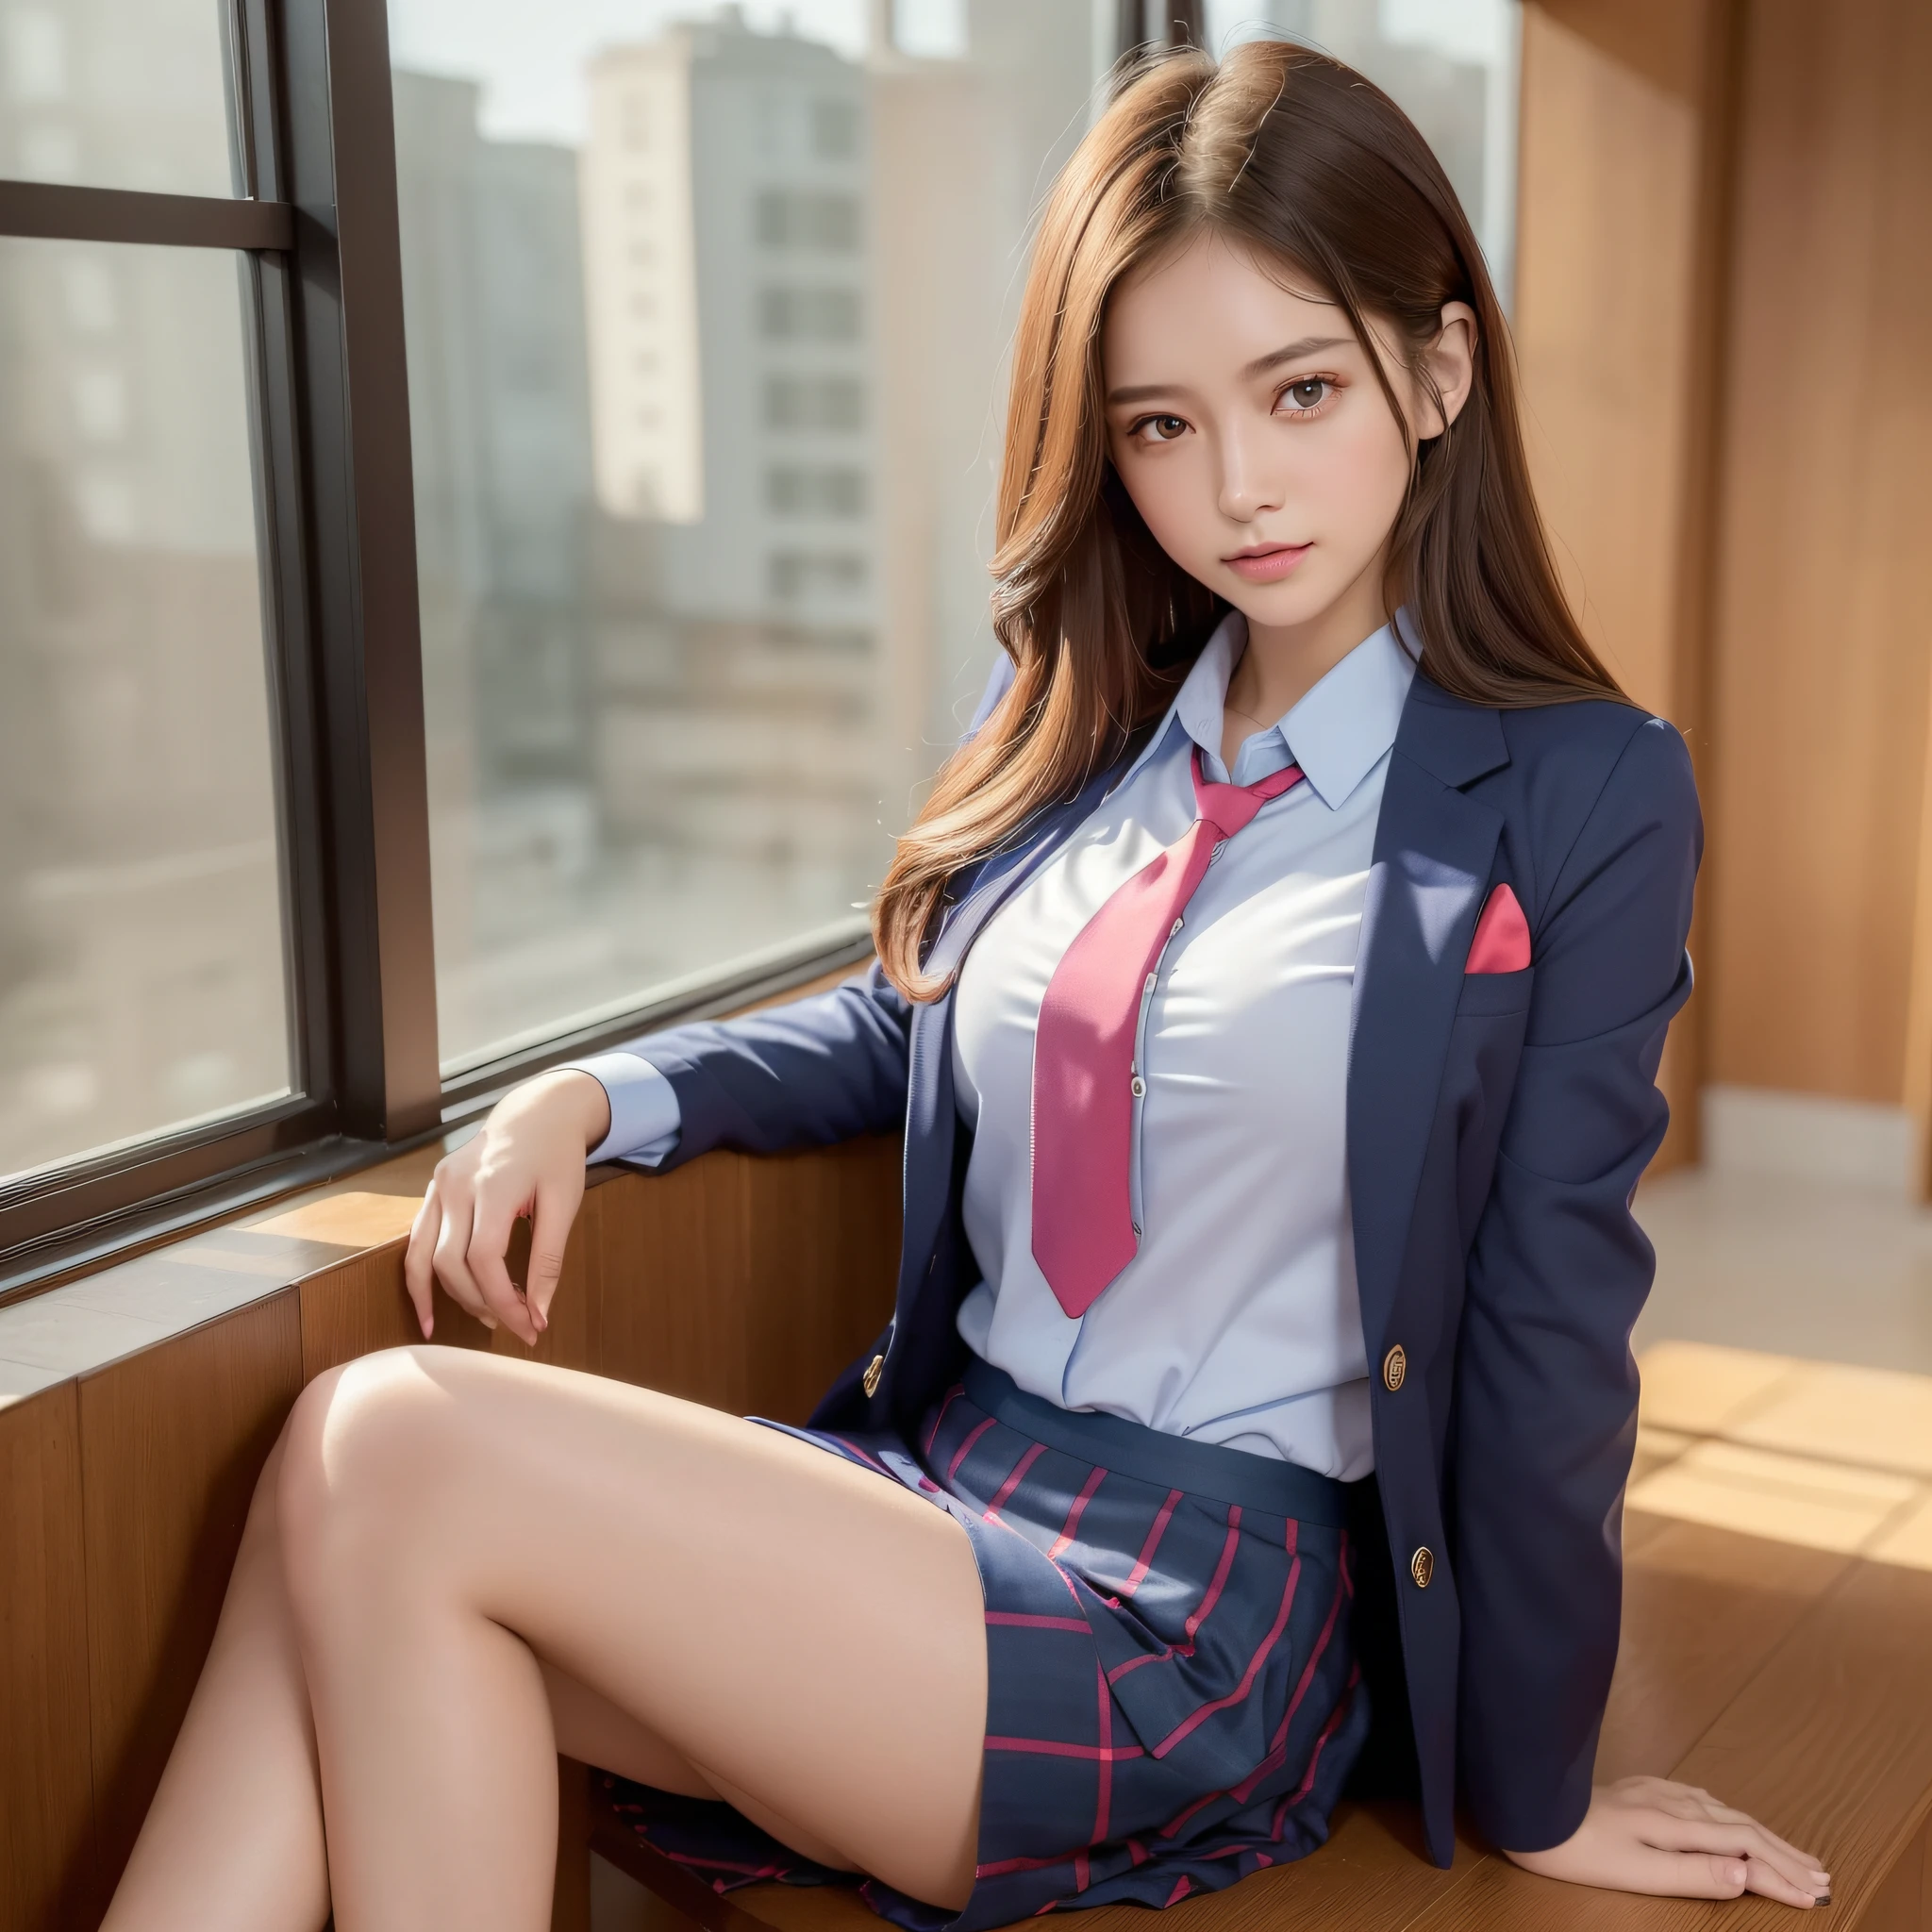 ((Best Quality, 8K, Masterpiece: 1.3)), 1 Girl, Slim, Full Body, (Hairstyle Casual, Big: 1.2), (Pink Y-shirt, Red Tie, Dark Blue Skirt, Loafers, Dark Blue Blazer: 1.2), Ultra Slender Face, Delicate Eyes, Double Eyelids, Smile, (Classroom: 1.0)